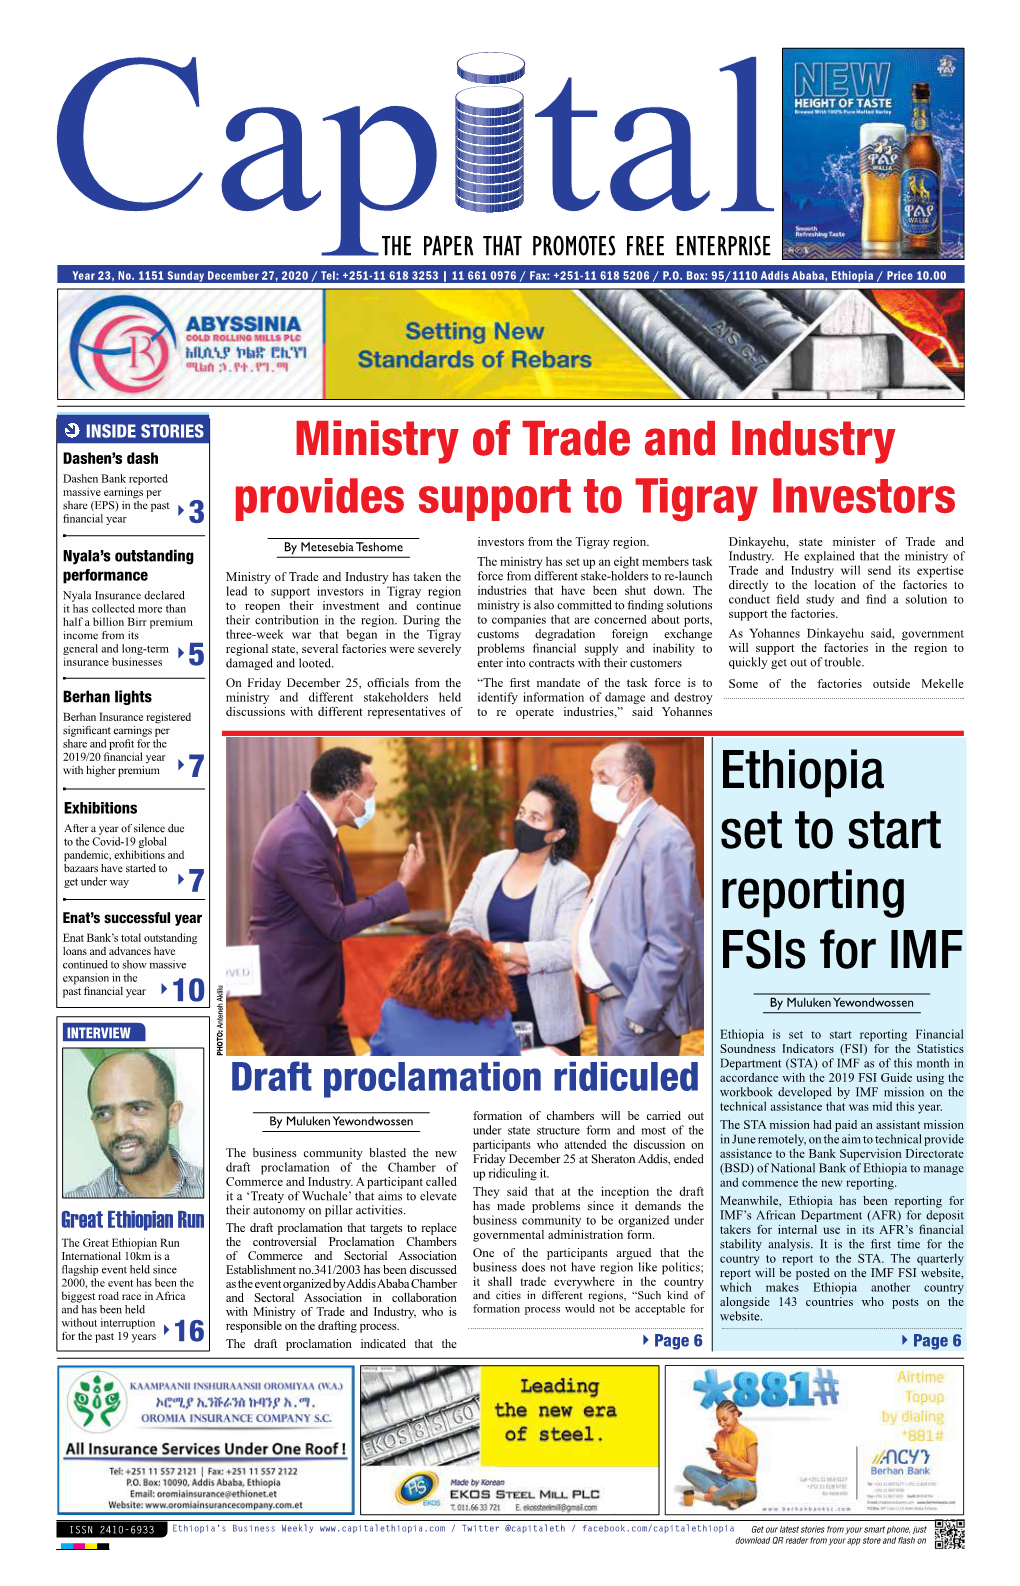 Ethiopia Set to Start Reporting Fsis For